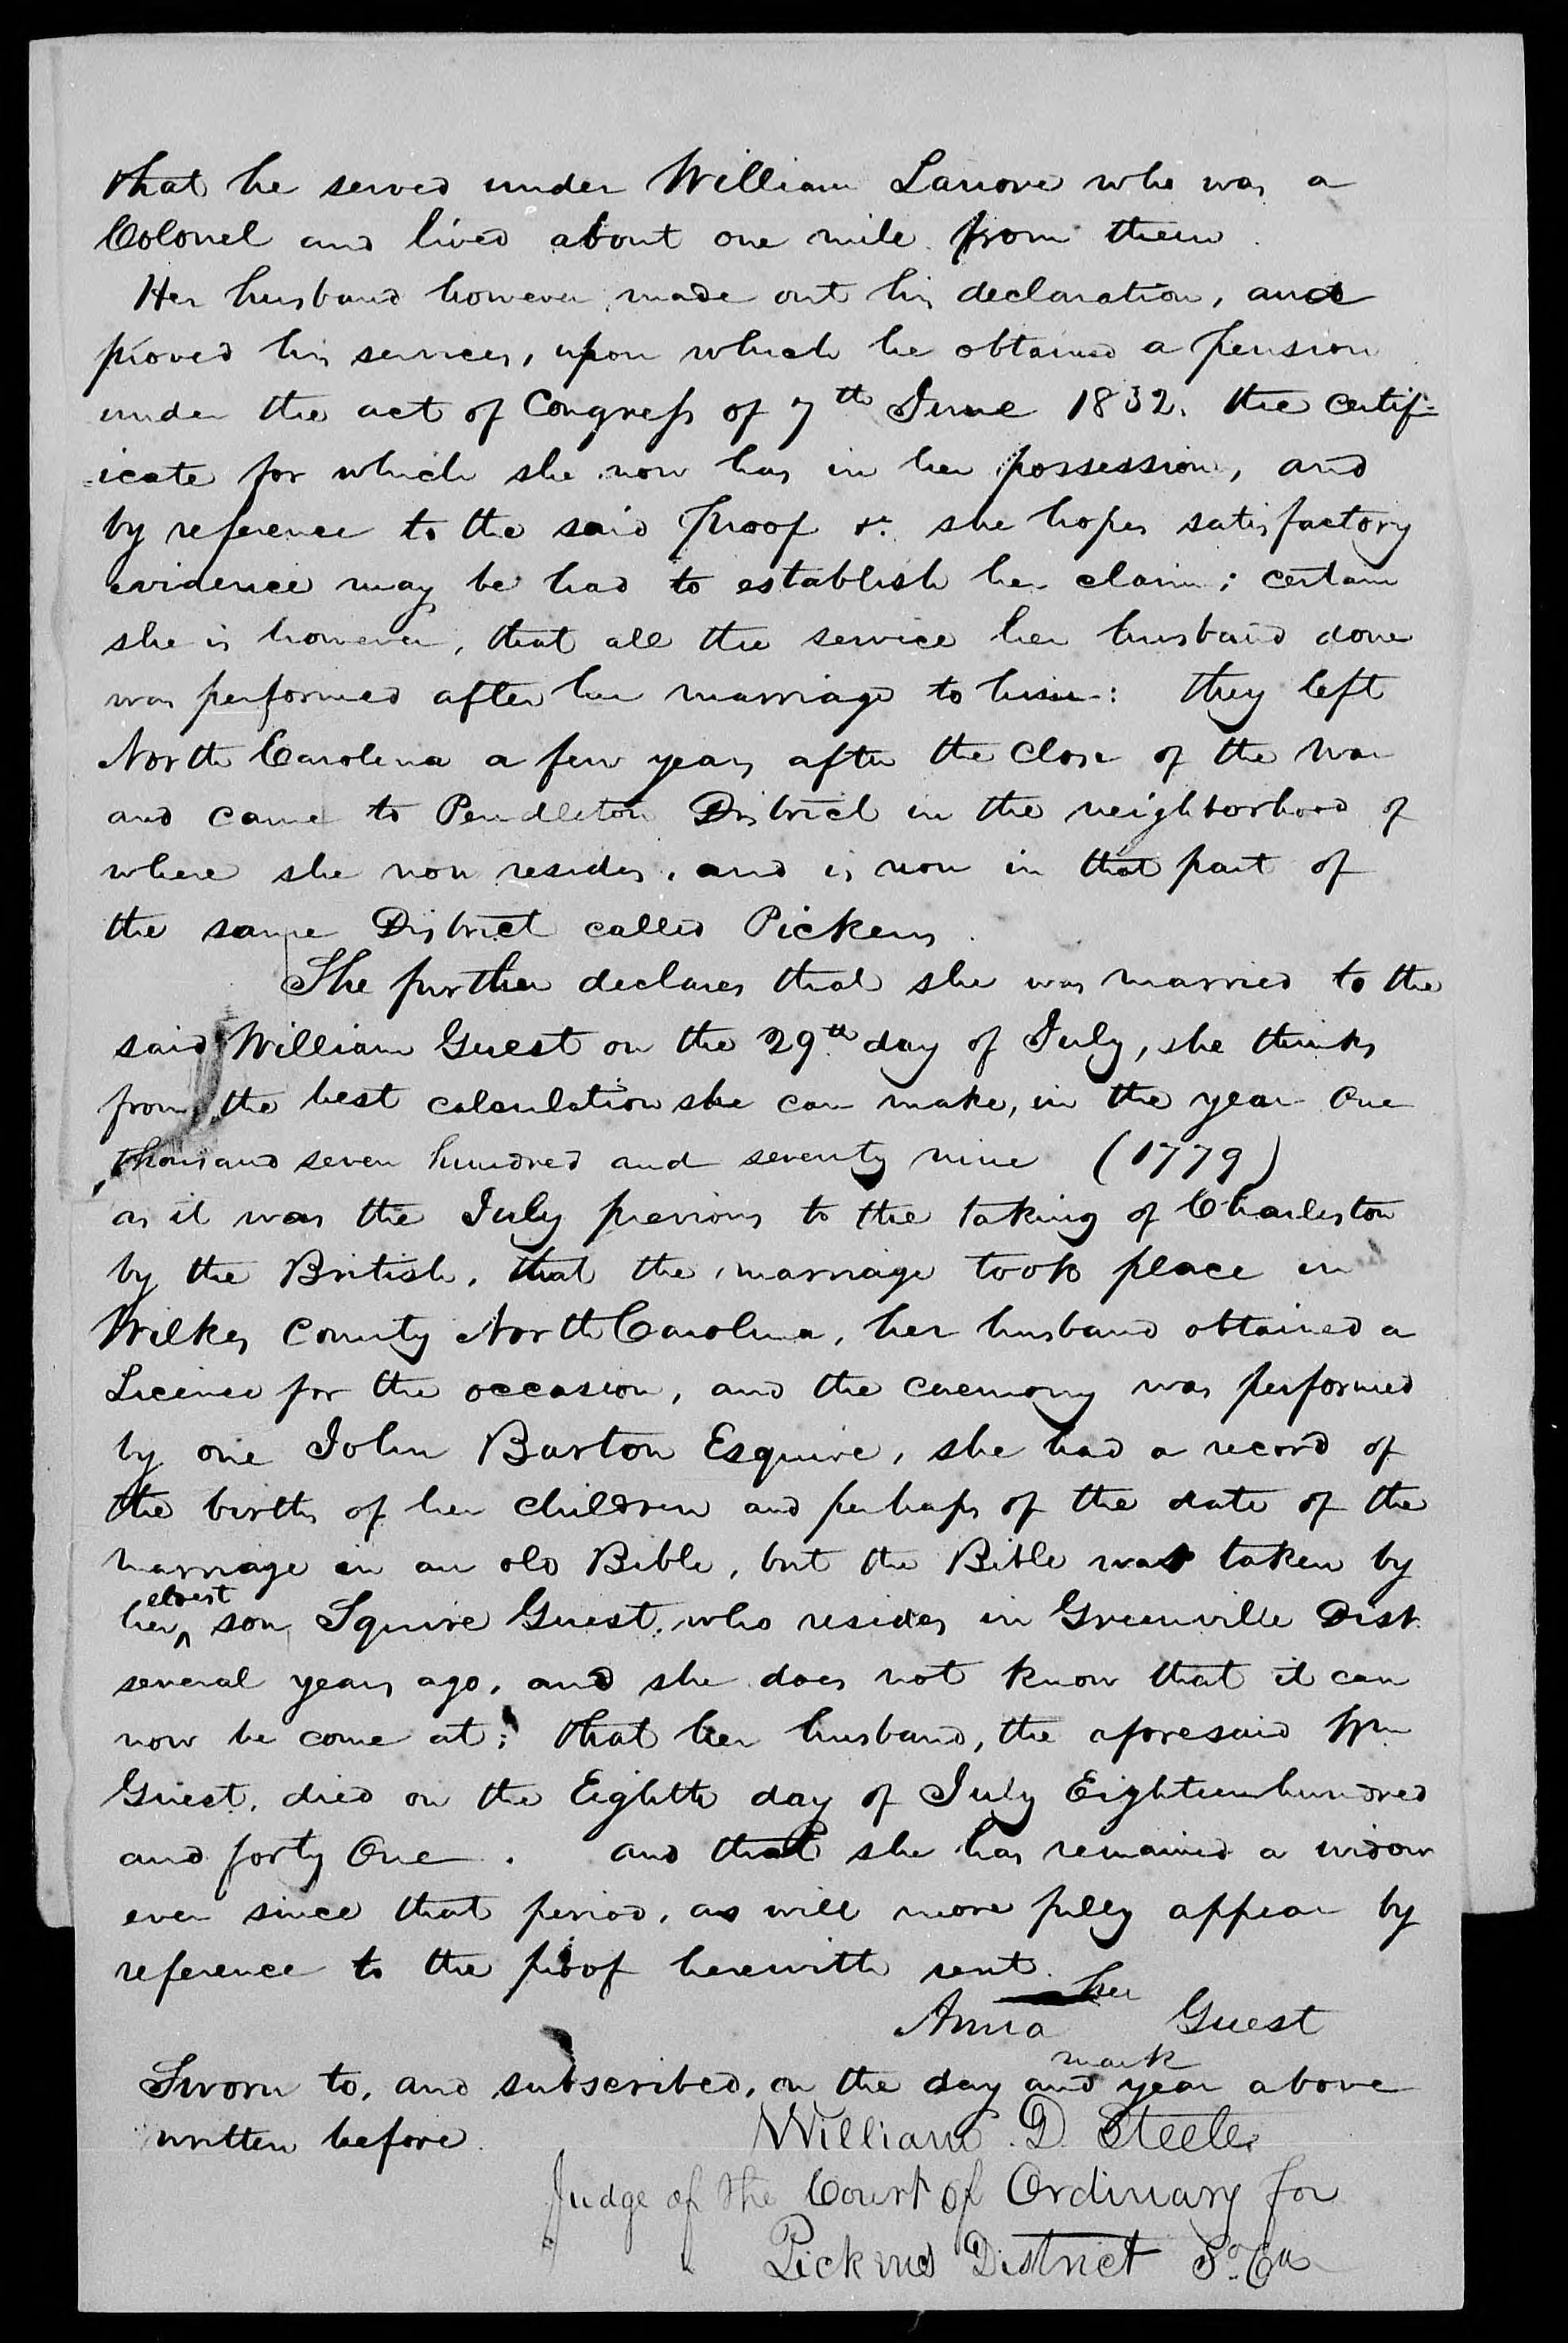 Application for a Widow's Pension from Anna Guest, 4 September 1845, page 2